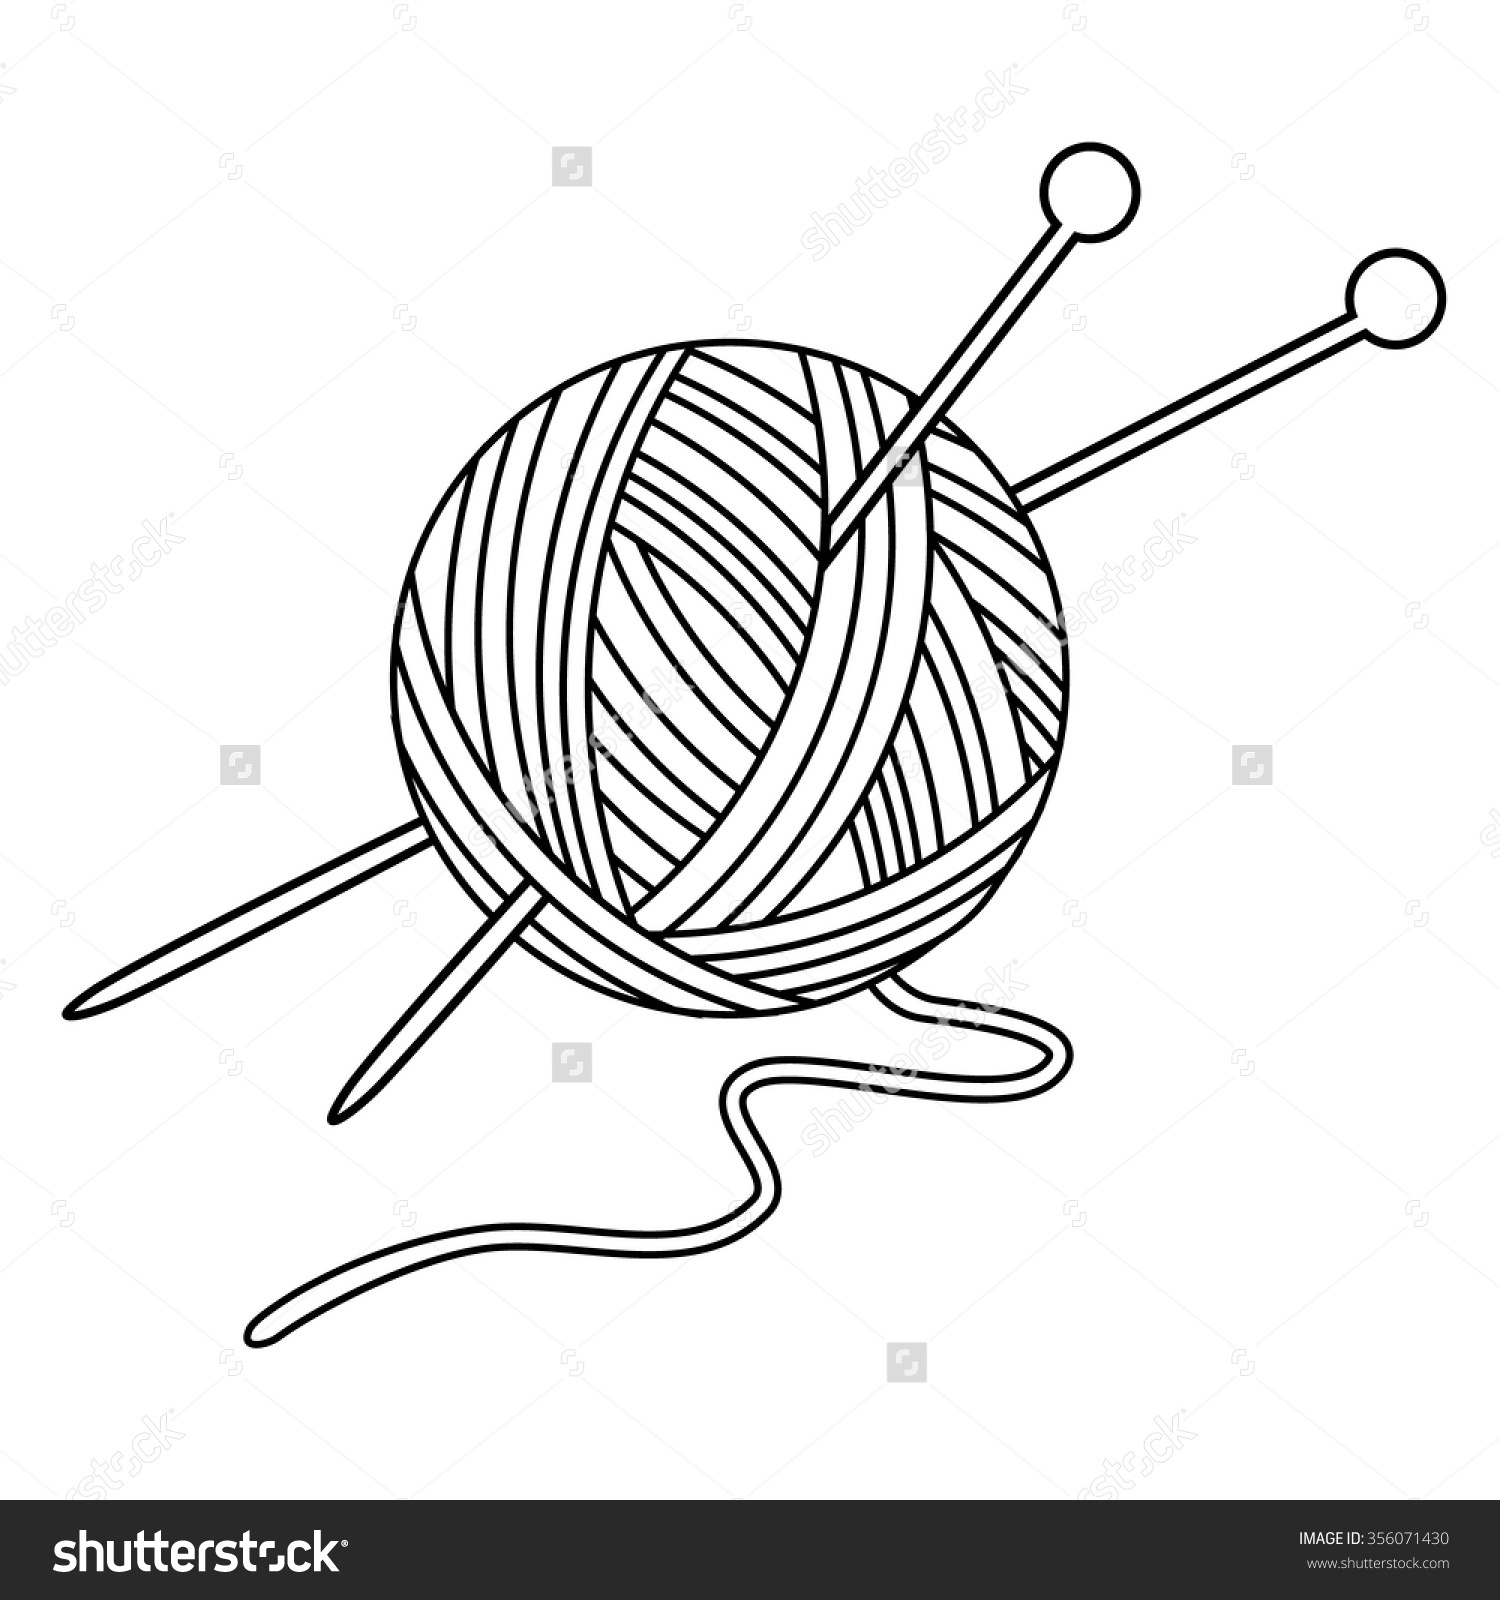 Yarn Coloring Book Coloring Pages